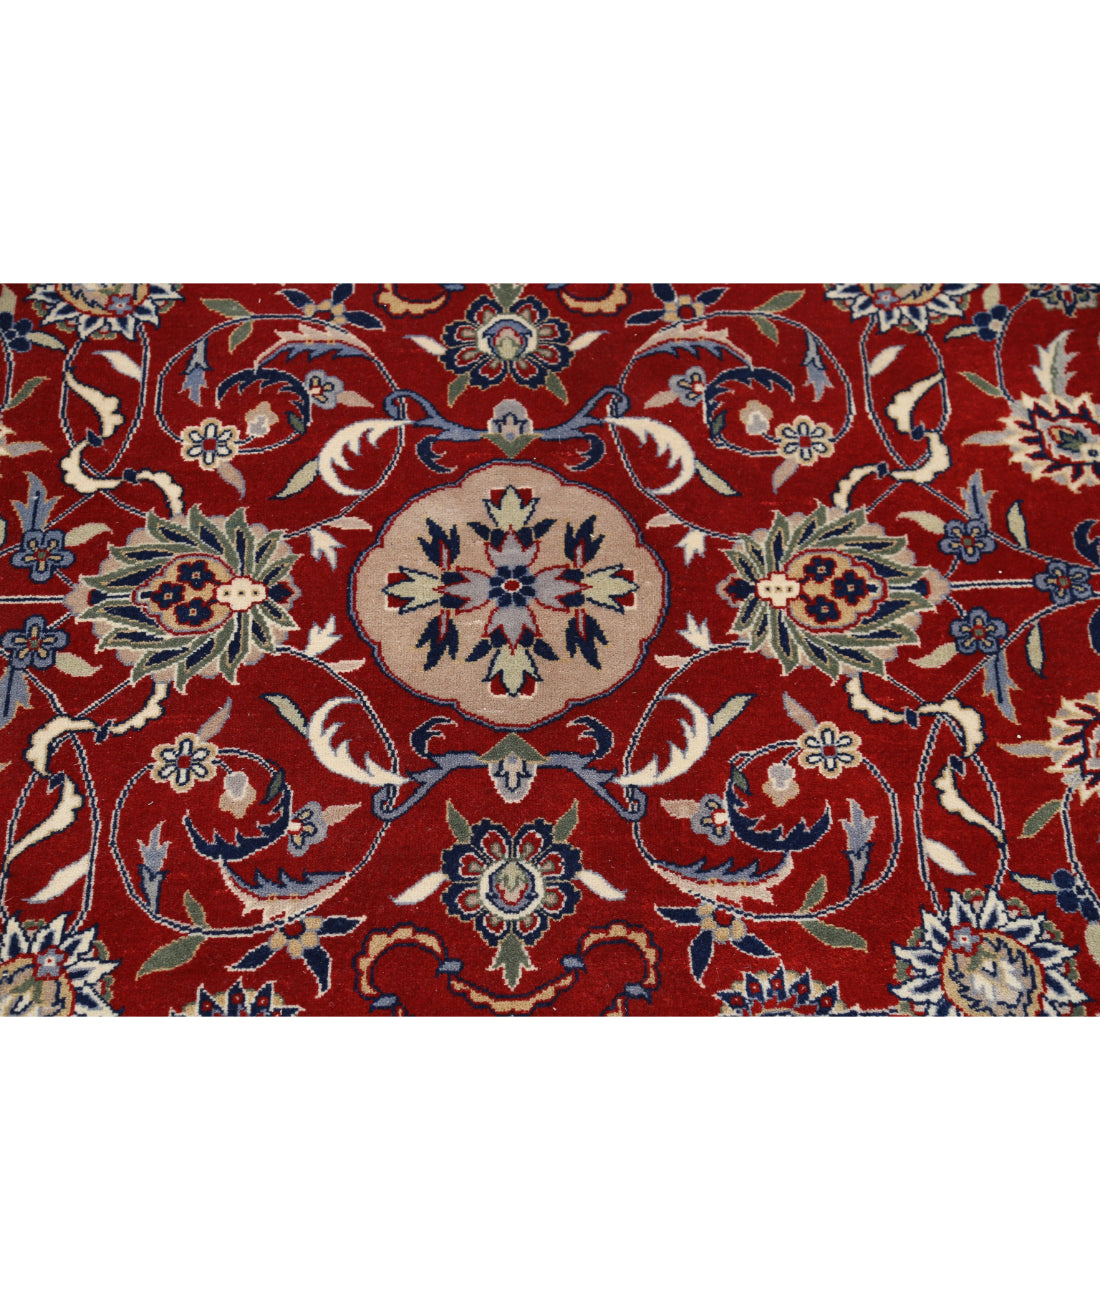 Hand Knotted Heritage Persian Style Wool Rug - 6'7'' x 6'7'' 6'7'' x 6'7'' (198 X 198) / Red / Blue